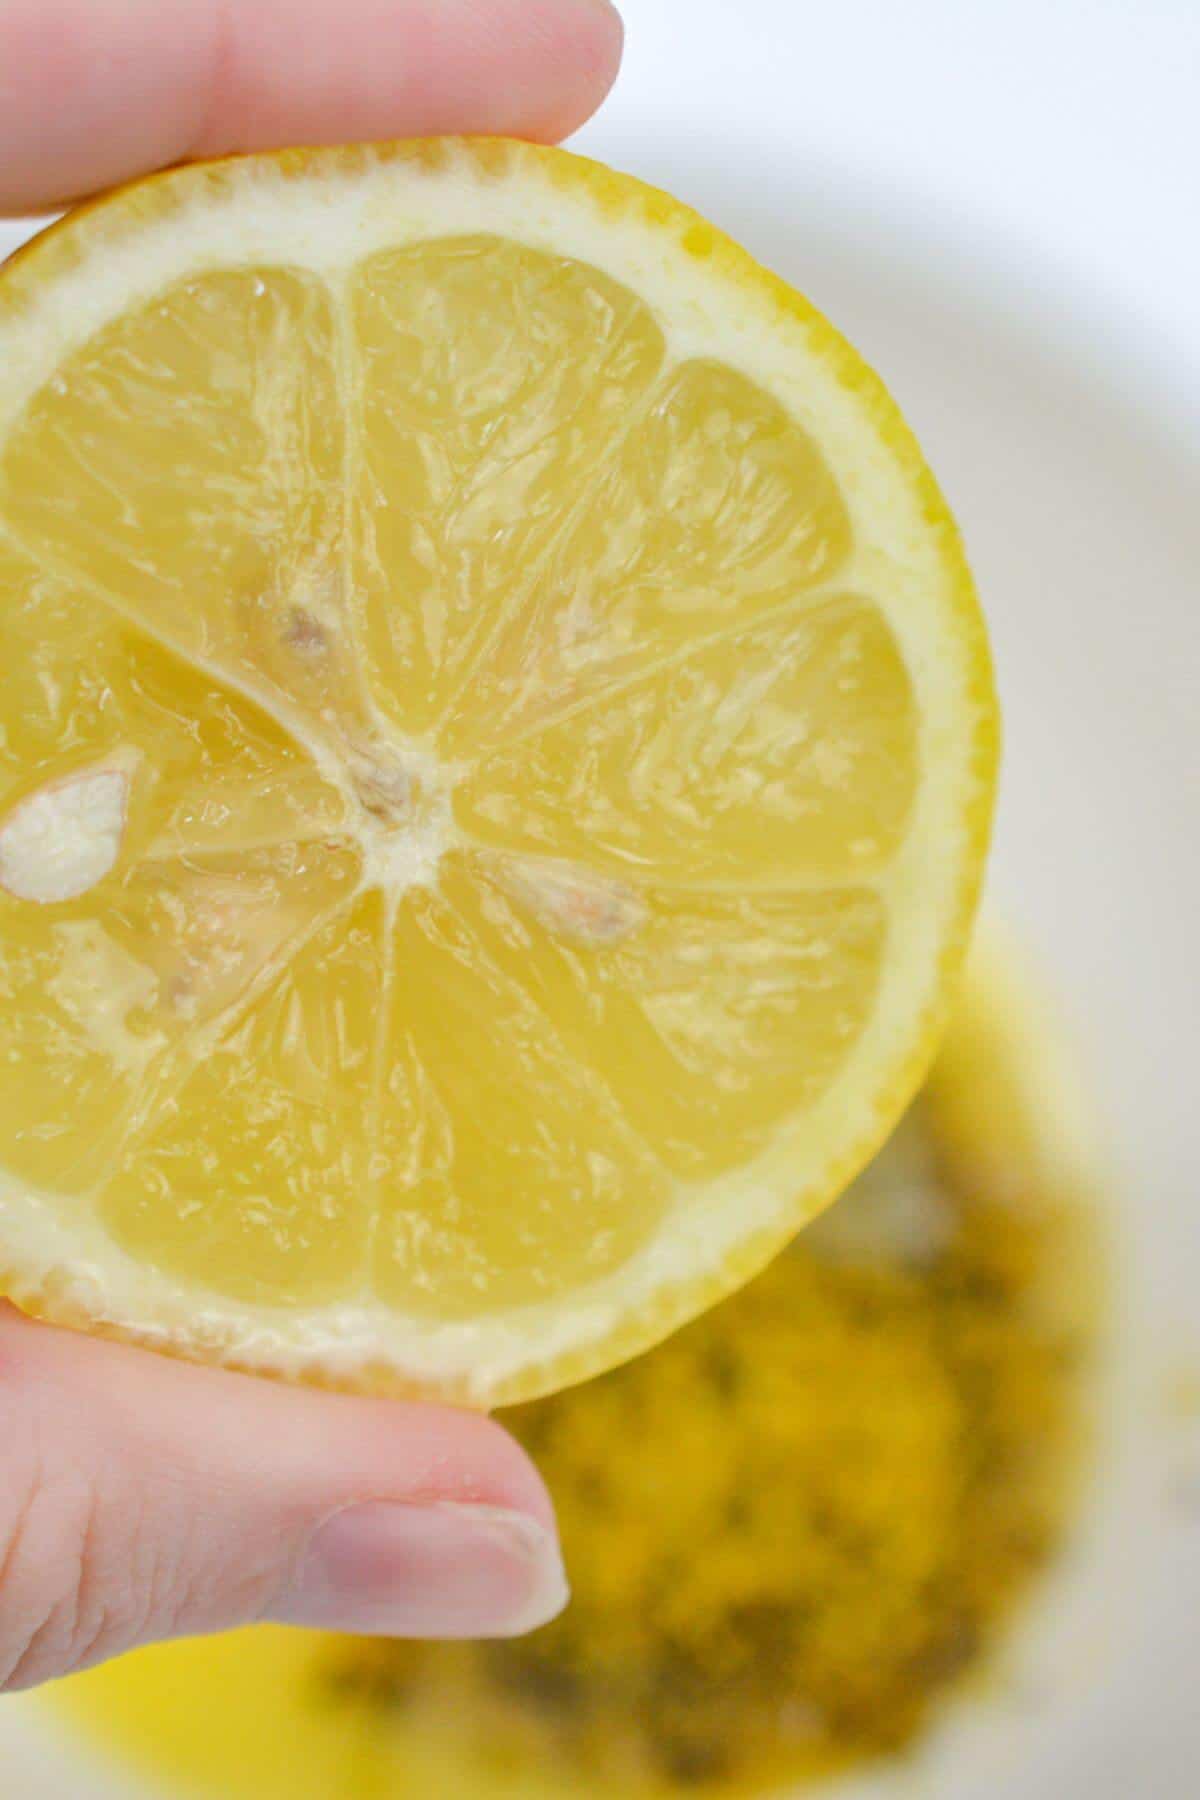 Adding squeeze of lemon juice melted butter in bowl.